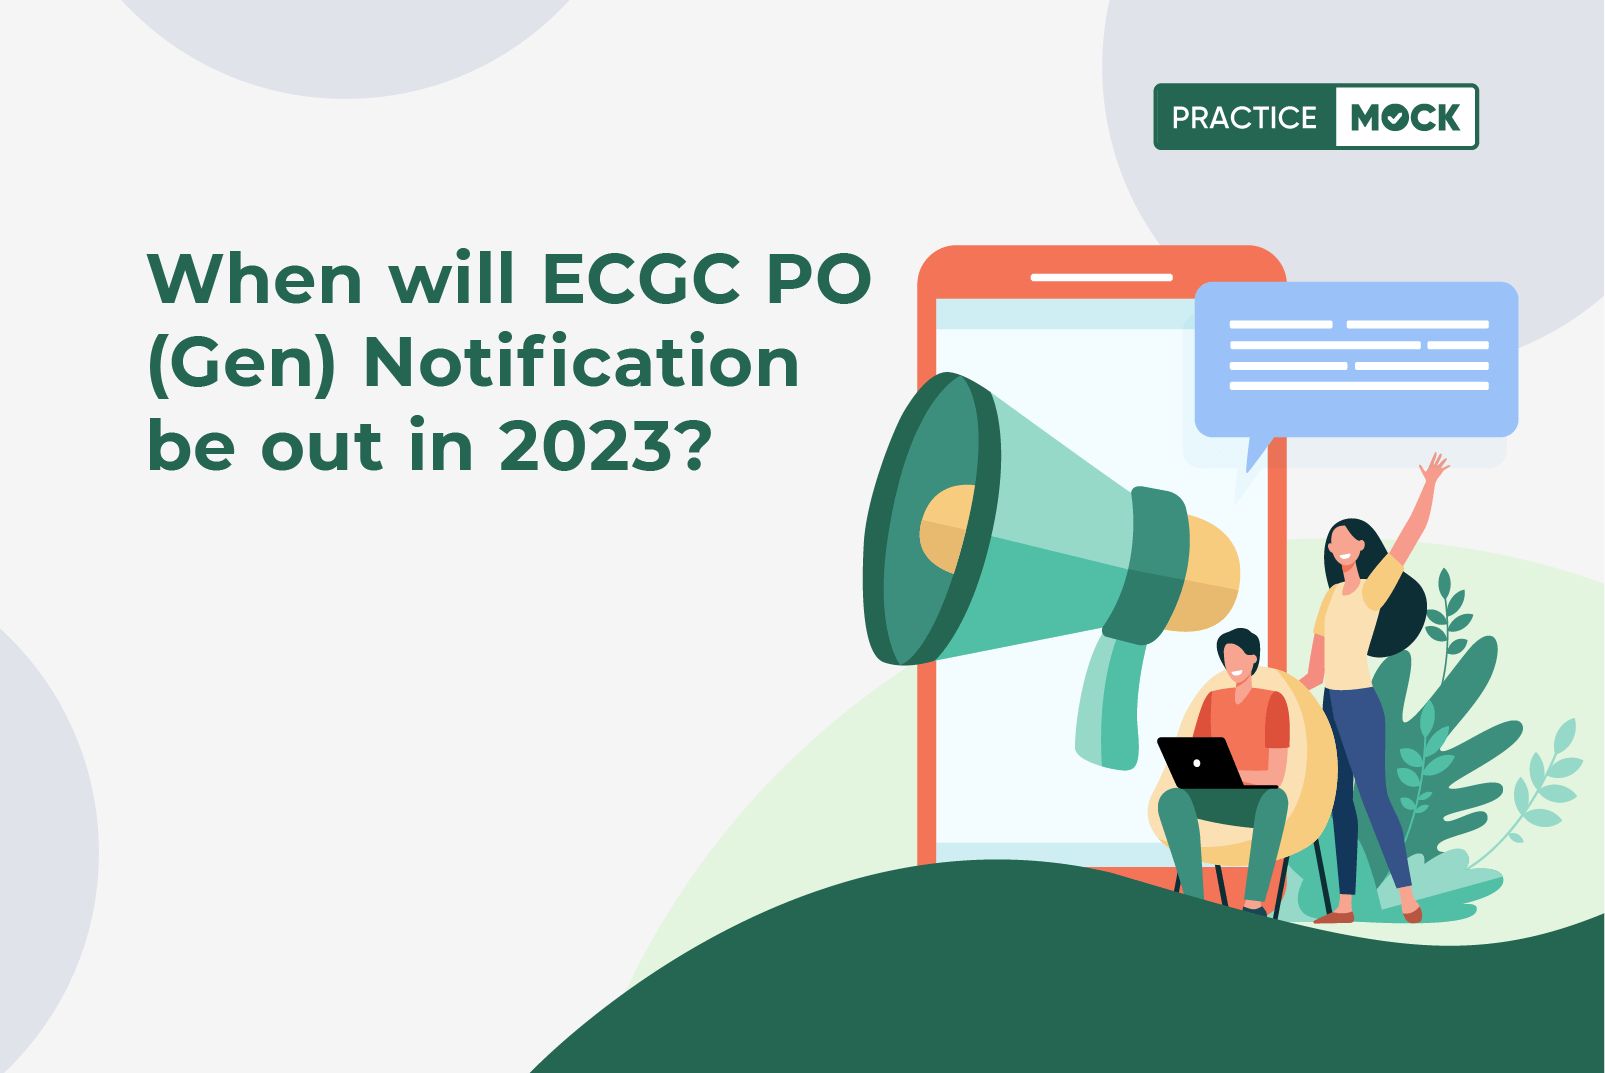 When will ECGC PO (Gen) notification be out in 2023